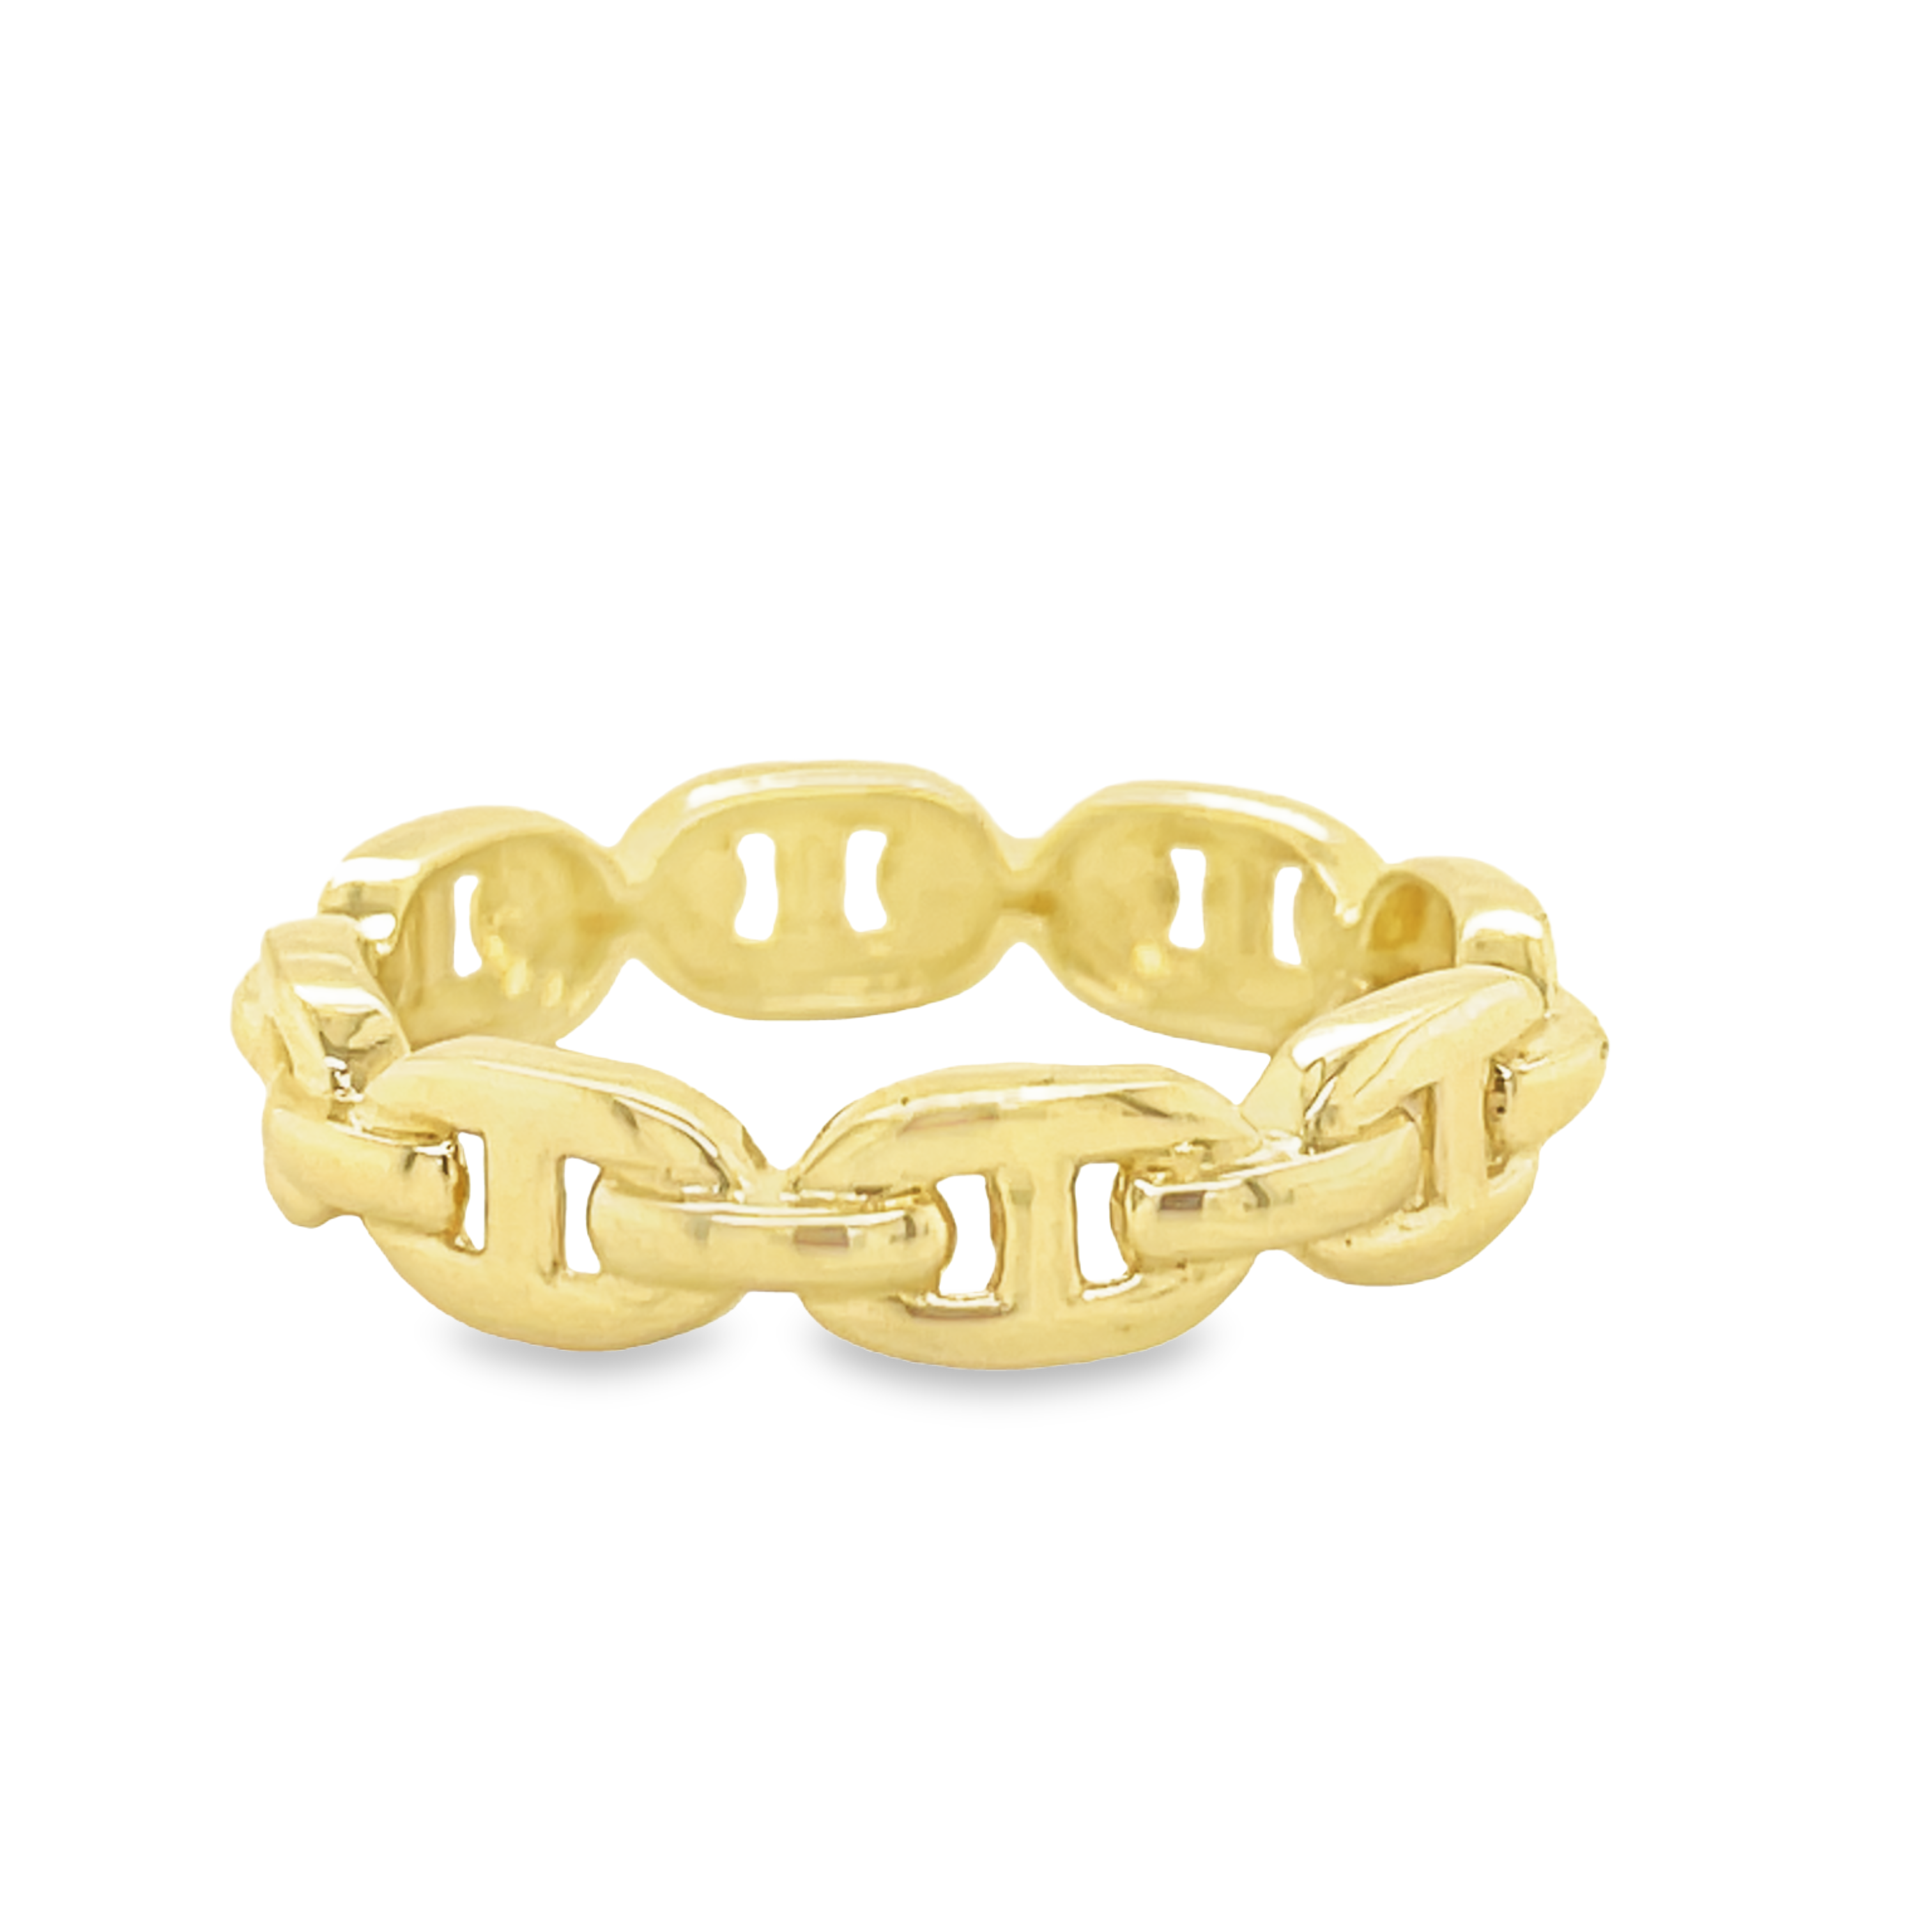  A timeless ring crafted from luxurious 14k yellow gold. Enjoy the classic Italian mariner link style in a 4.60 mm width, perfect for any ensemble. Size 7; with sizing options available, you can customize the perfect fit.